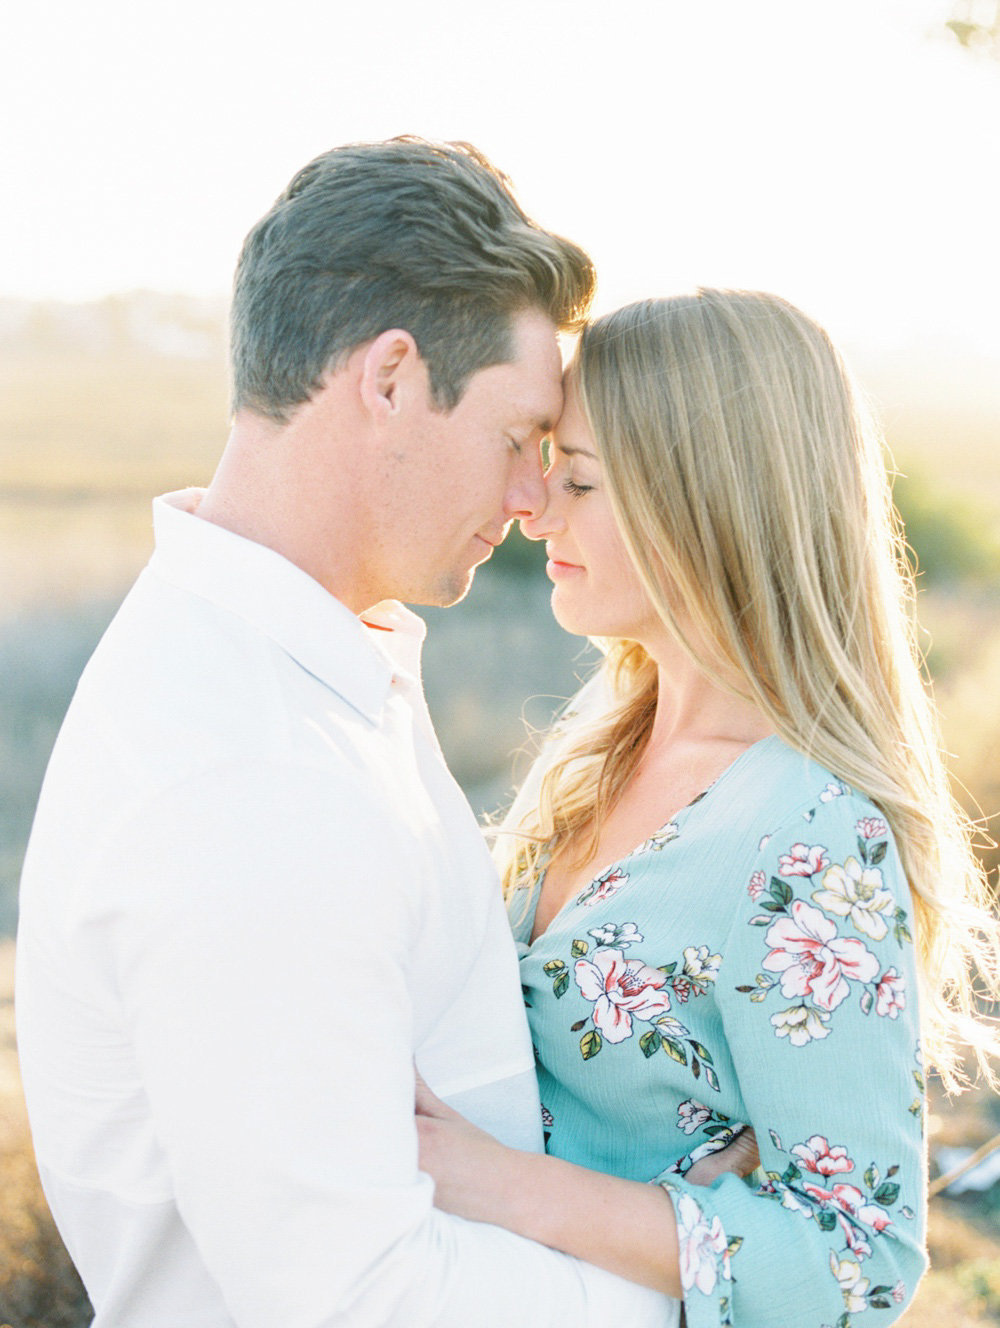 San-Diego-Engagement-Photographer-Mandy-Ford-009